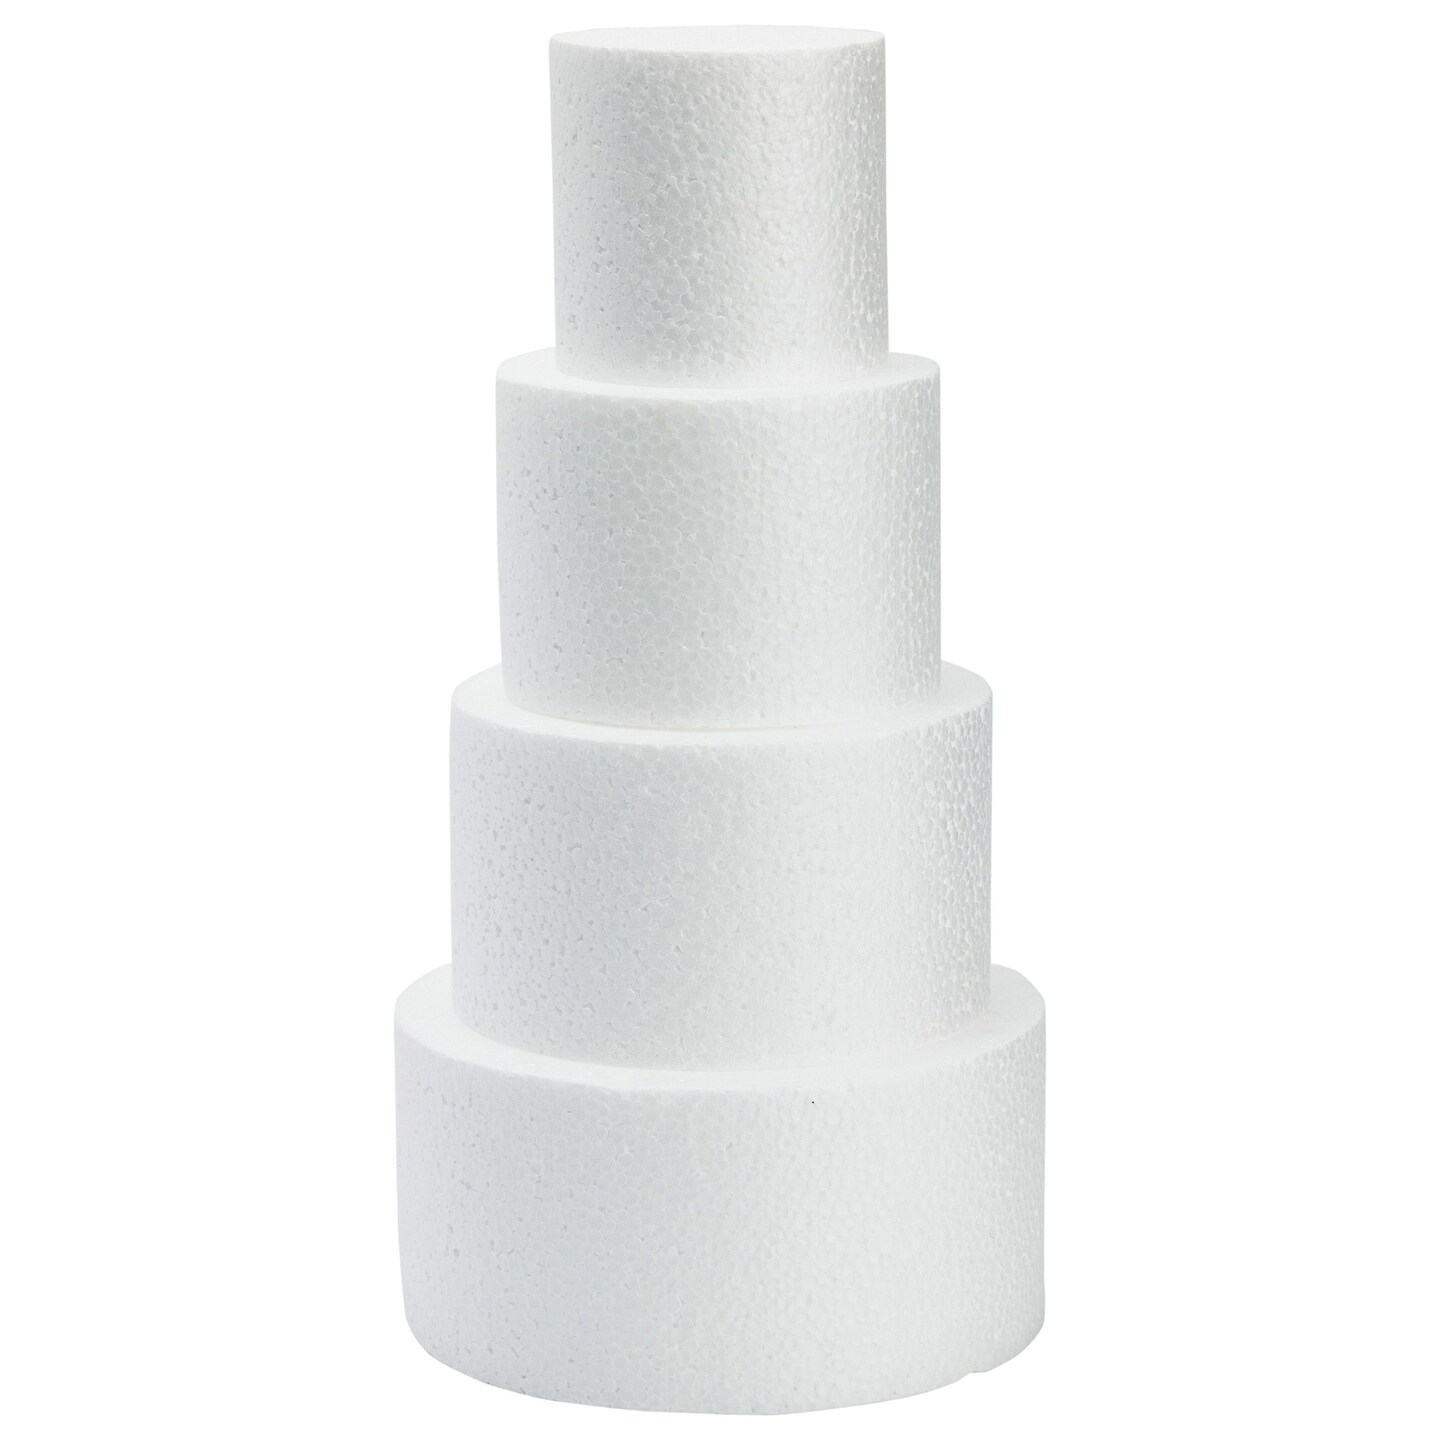 4 Piece Round Foam Cake Dummies for 12 Tall Fake Wedding Cake in 4 Sizes,  for Decorating and Crafts (3, 4, 5, and 6 In)